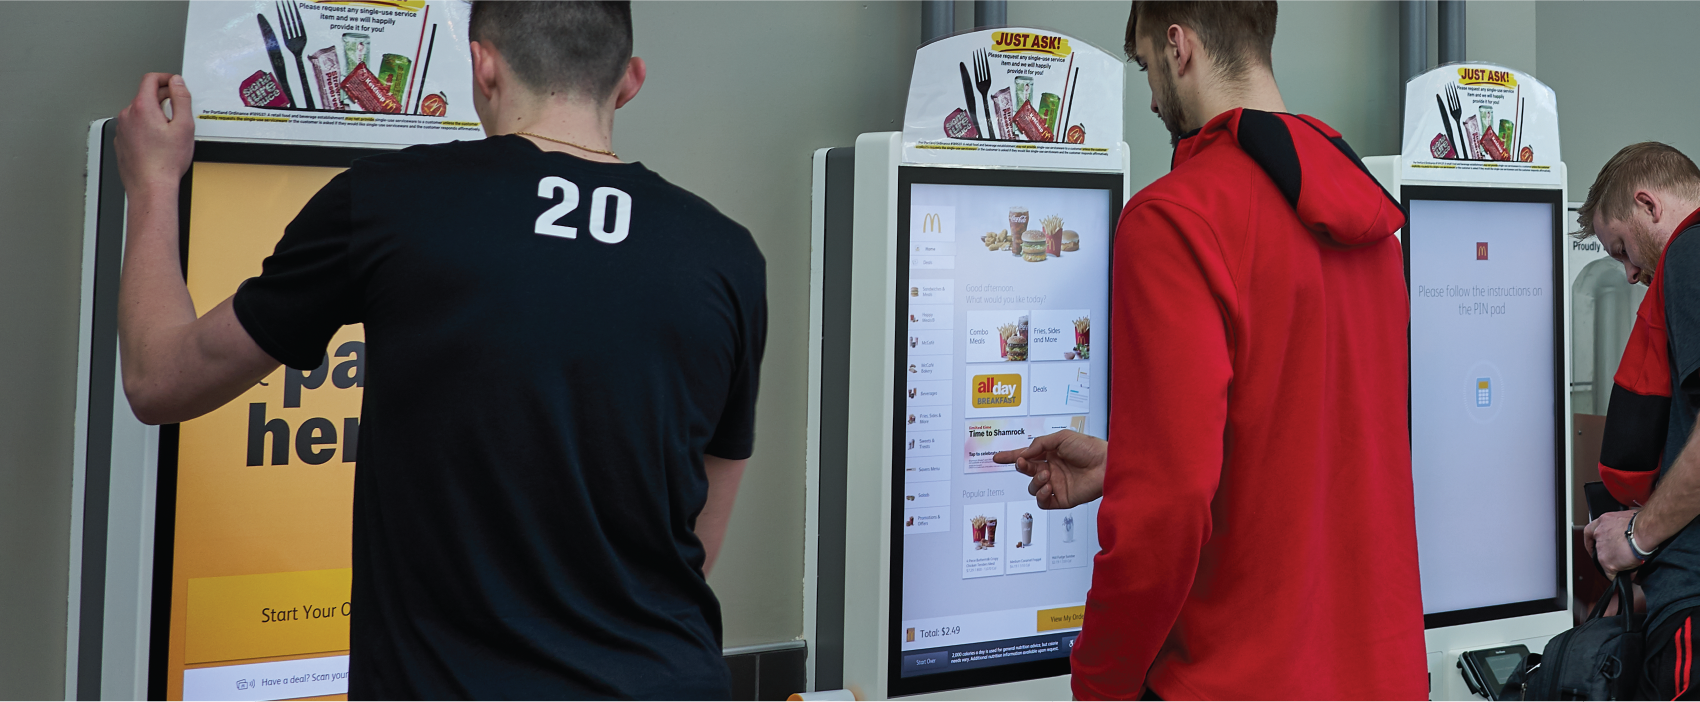 Self-Ordering Kiosks in Quick Service Restaurants and the Retail Environment